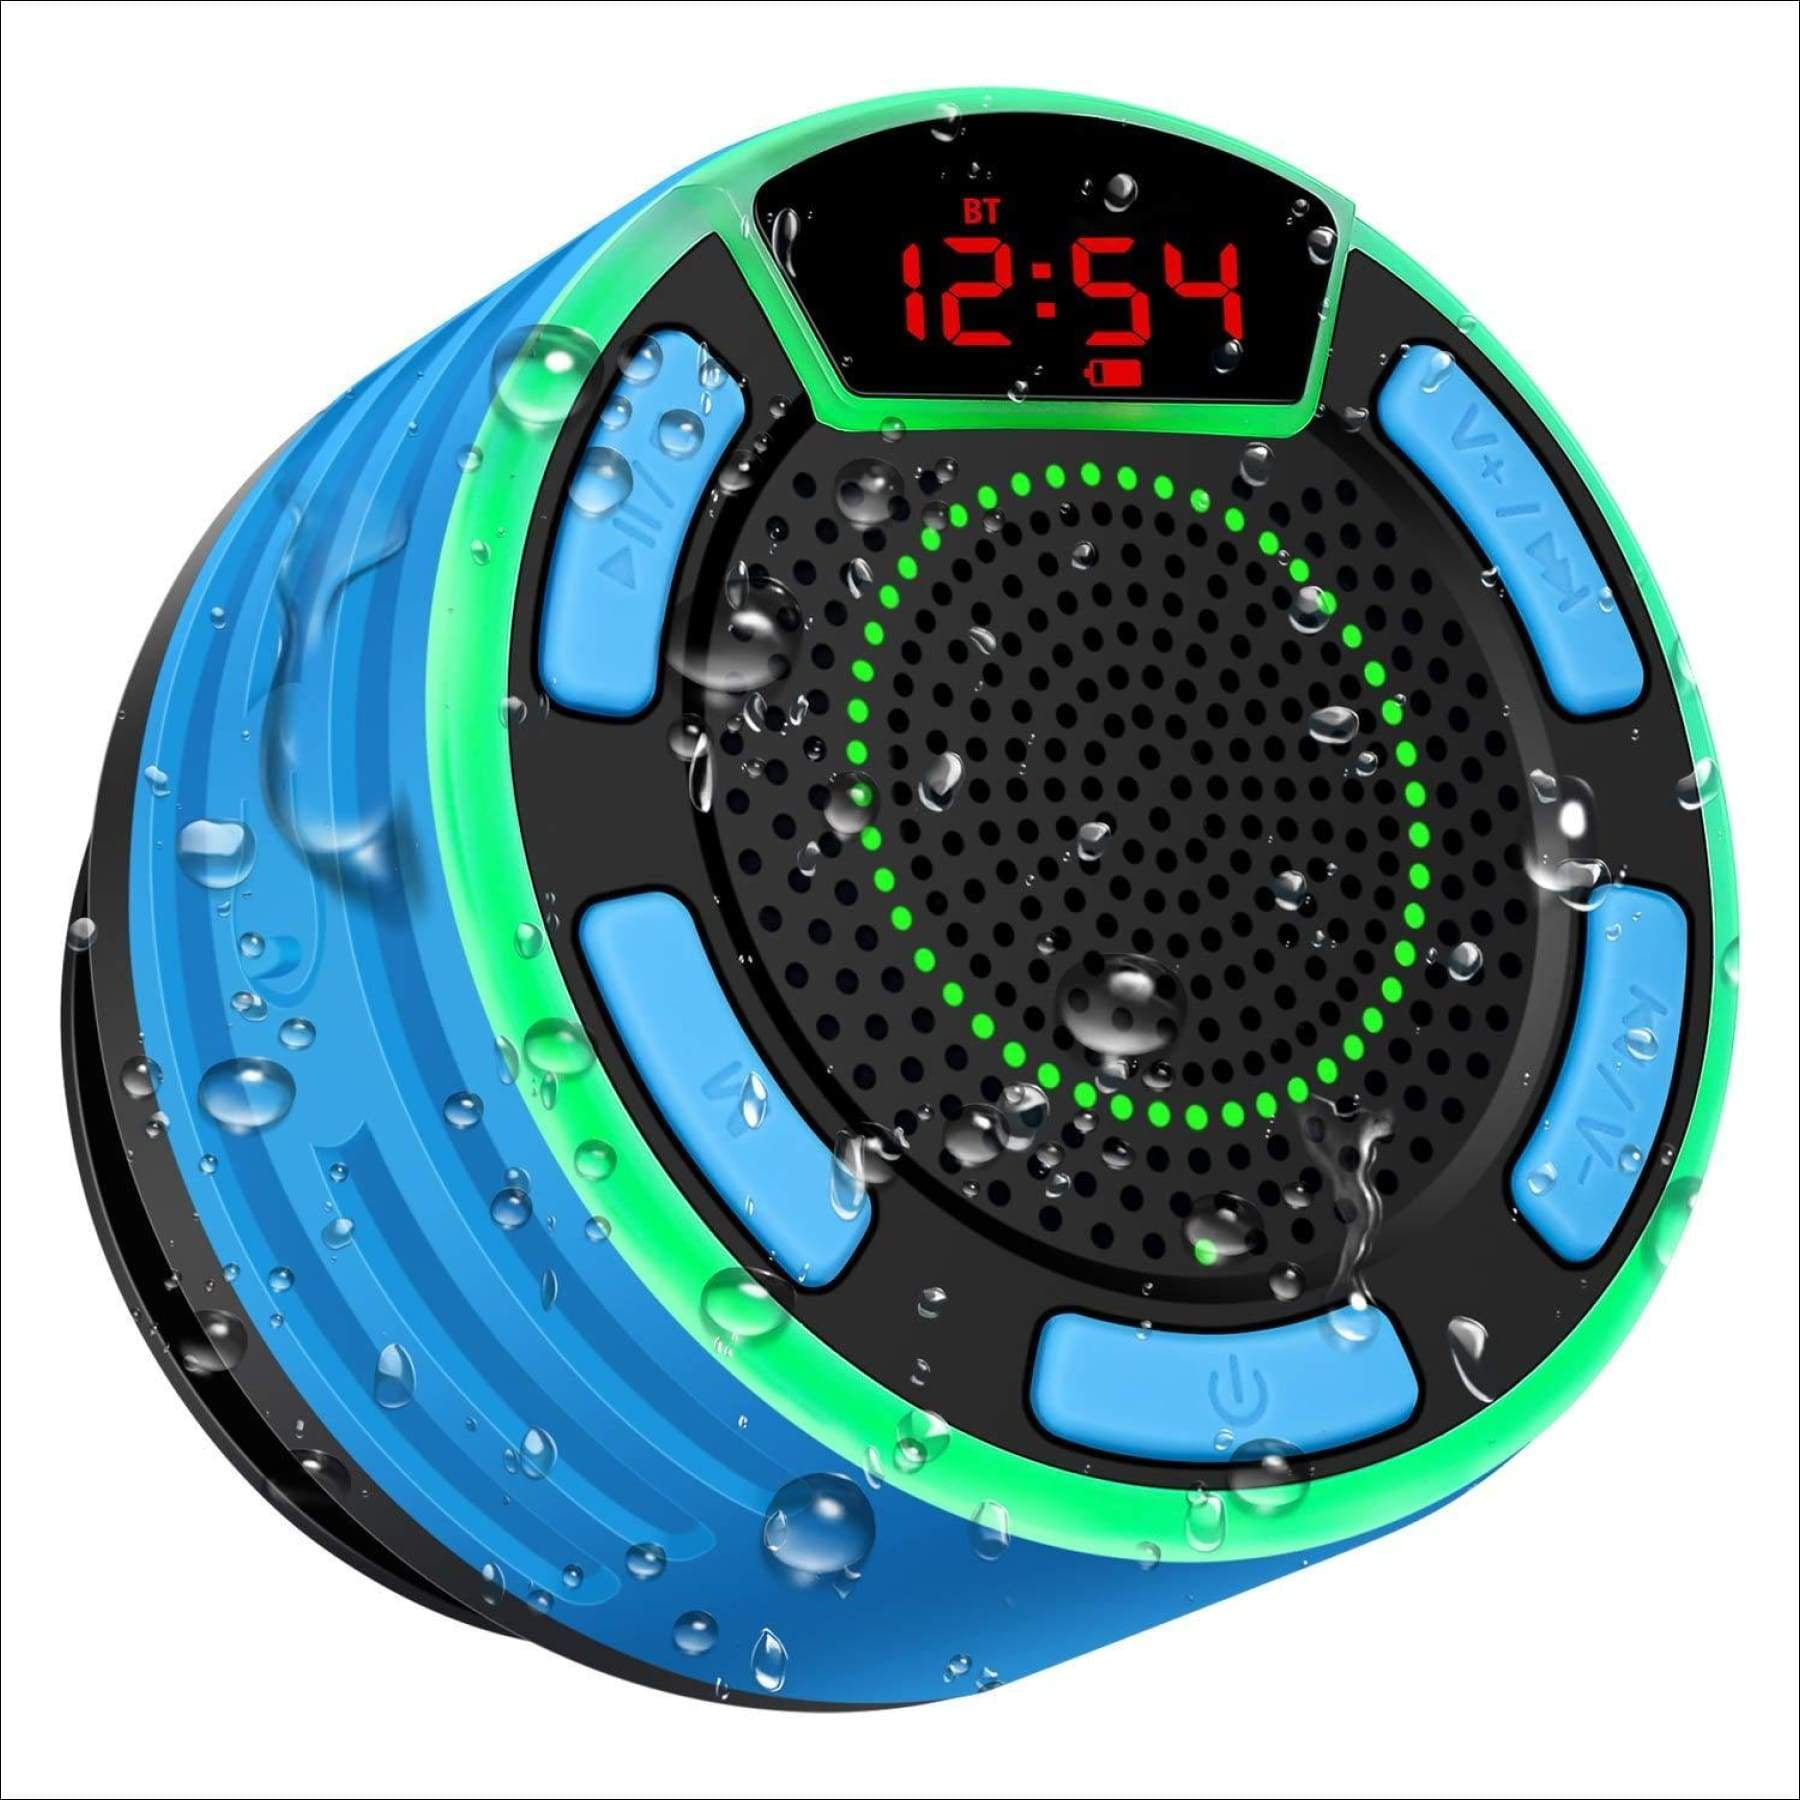 Pool BassPal Shower Speaker Perfect Speaker for Beach Gray IPX7 Waterproof Portable Wireless Bluetooth 4.0 Speakers with Super Bass and HD Sound Kitchen & Home